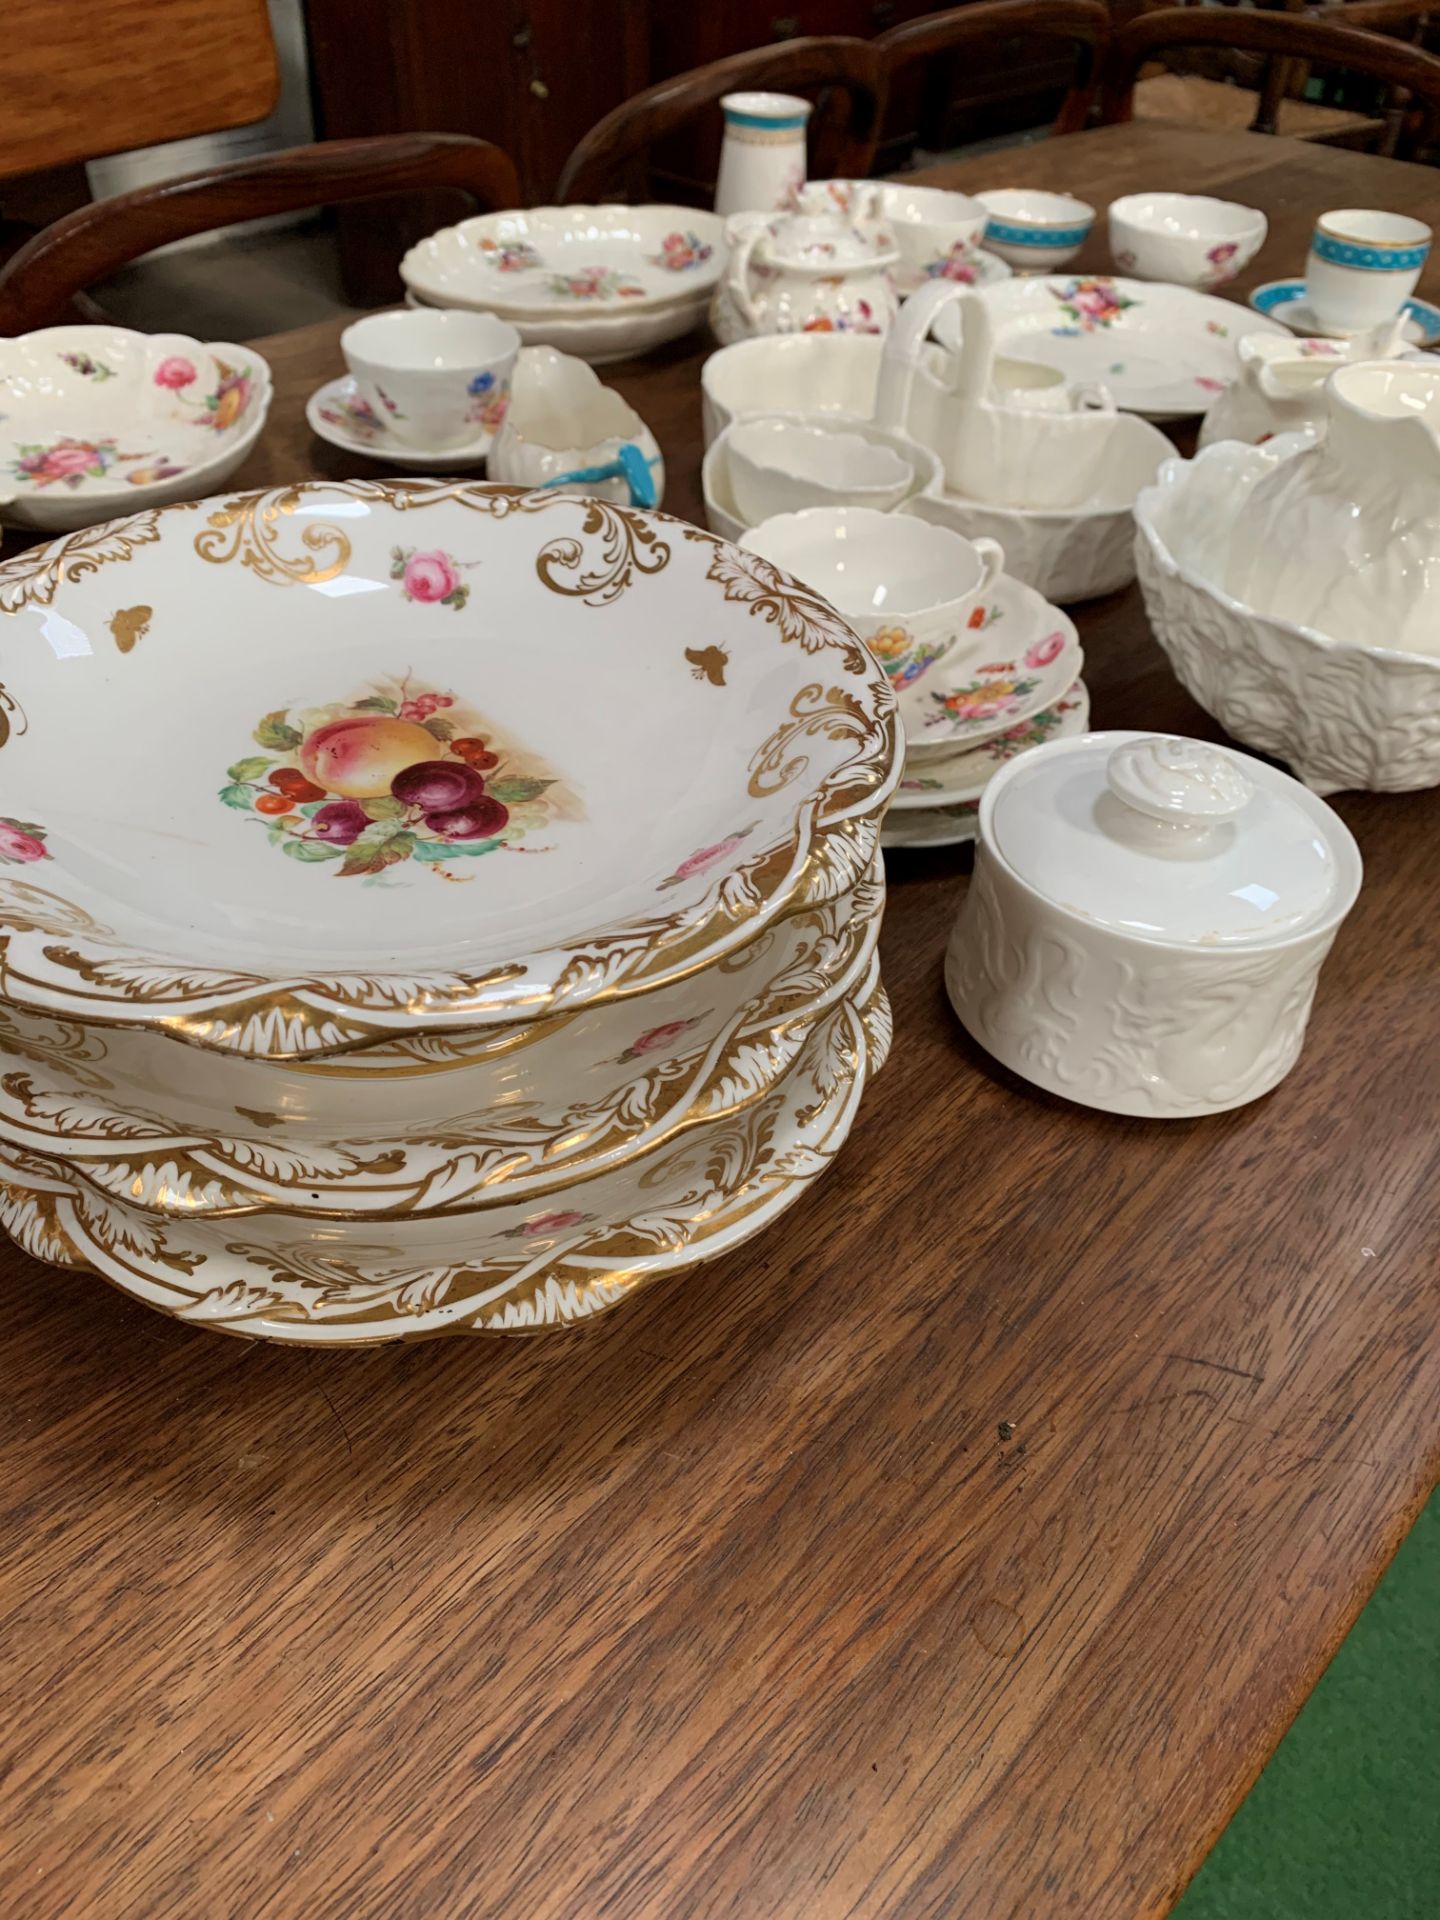 Collection of mainly Coalport china, plus Longport mid-19th century plates - Image 3 of 3